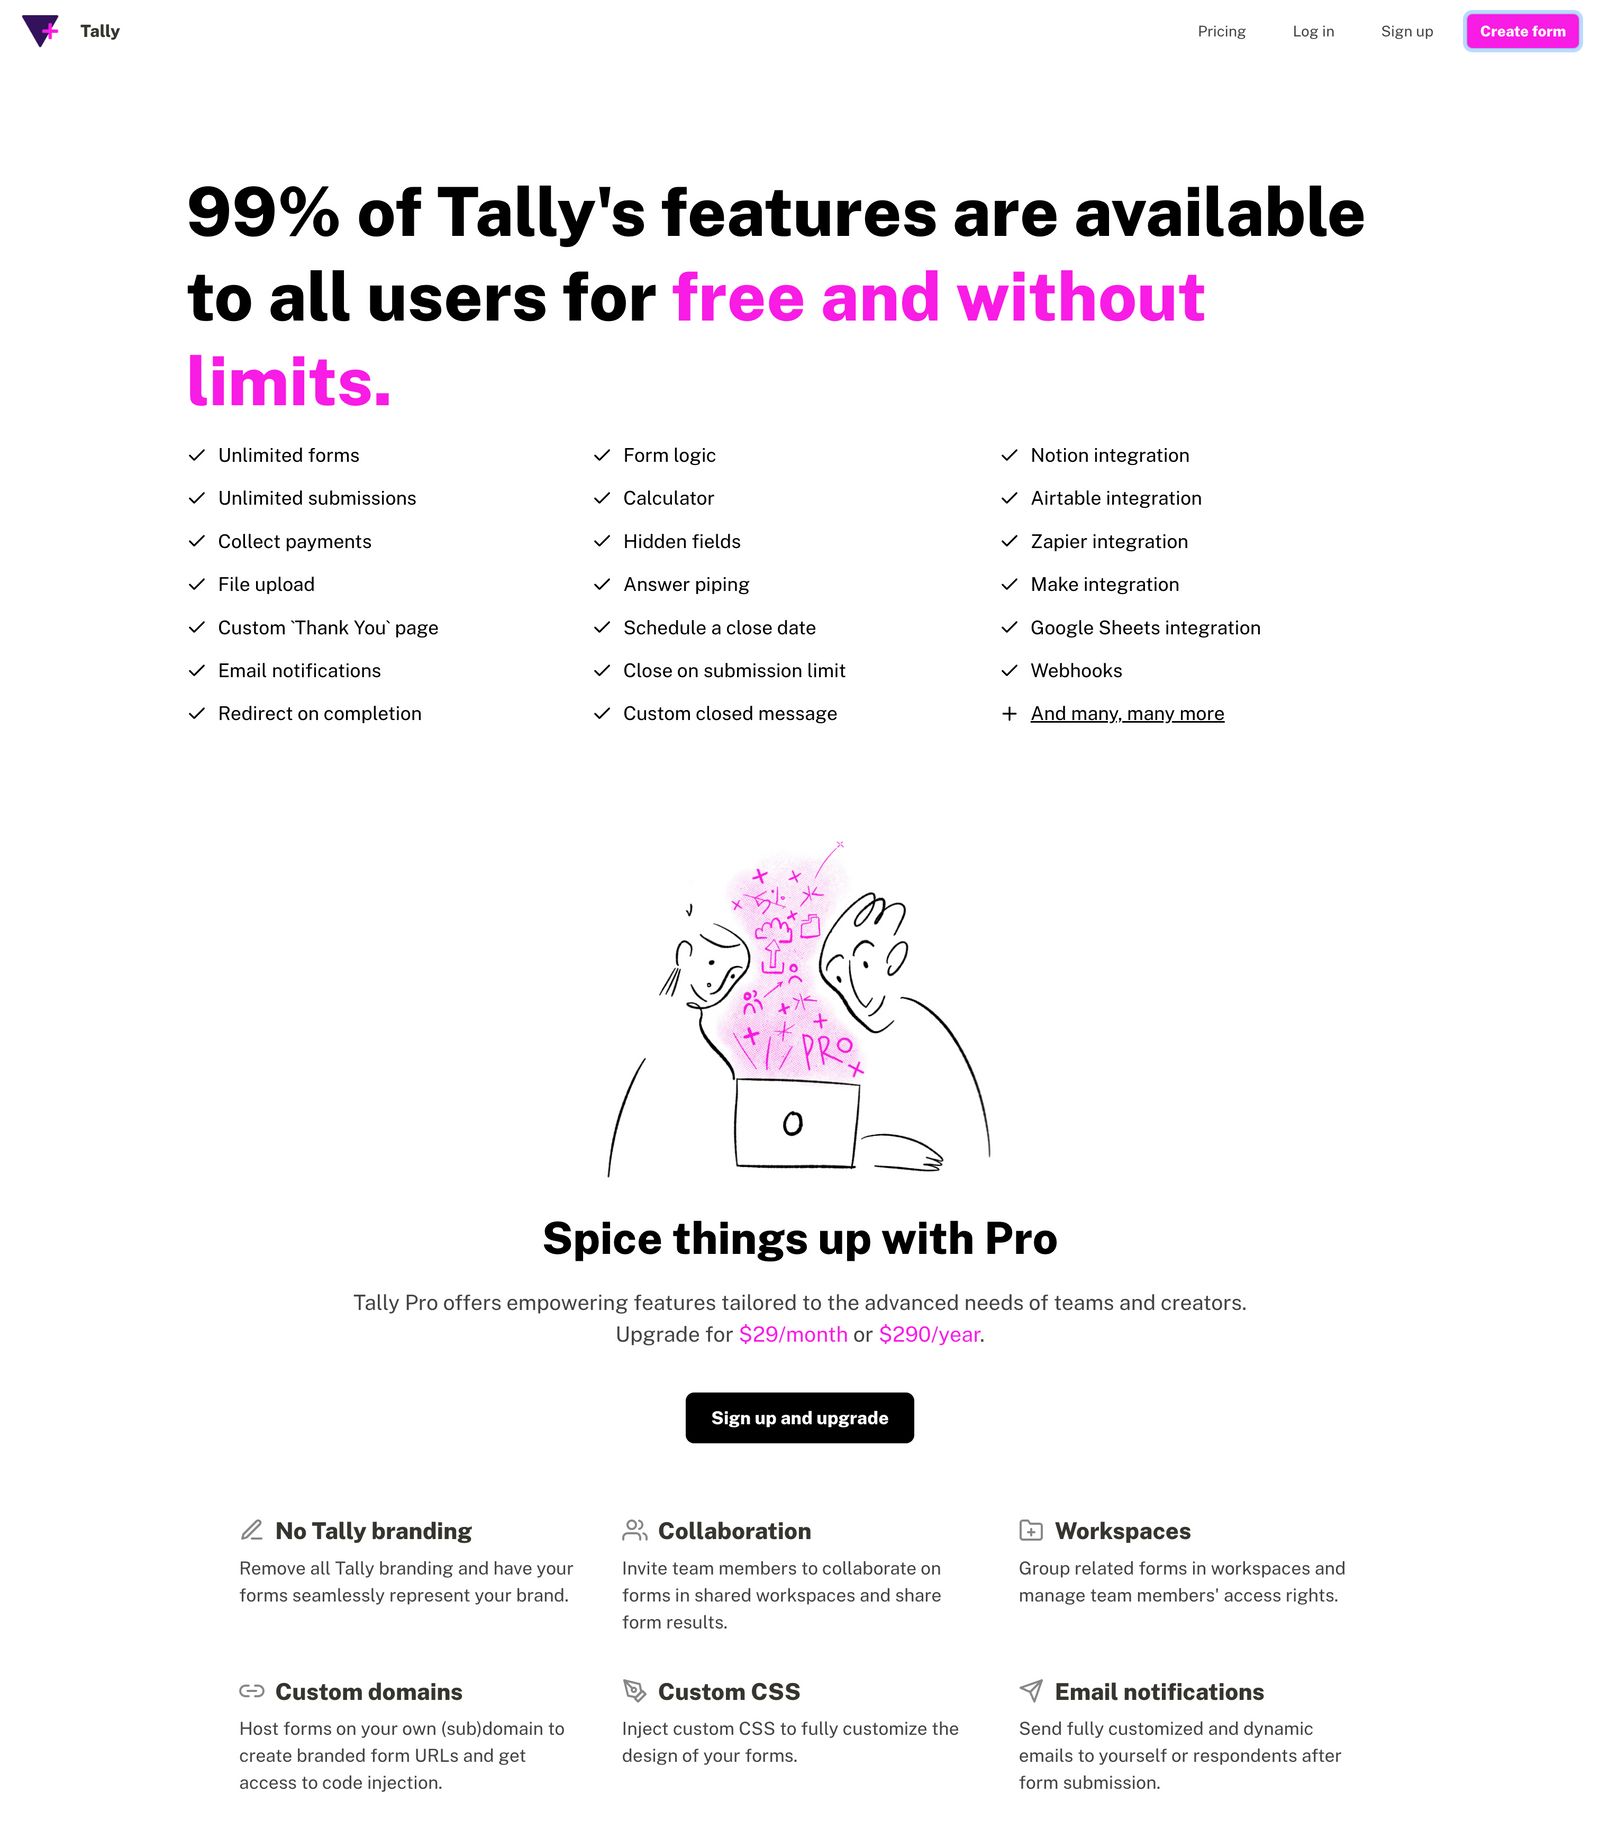 /articles/pricing-page-inspiration/pricing-page-design-example-12.jpg)_Pricing page example from Tally